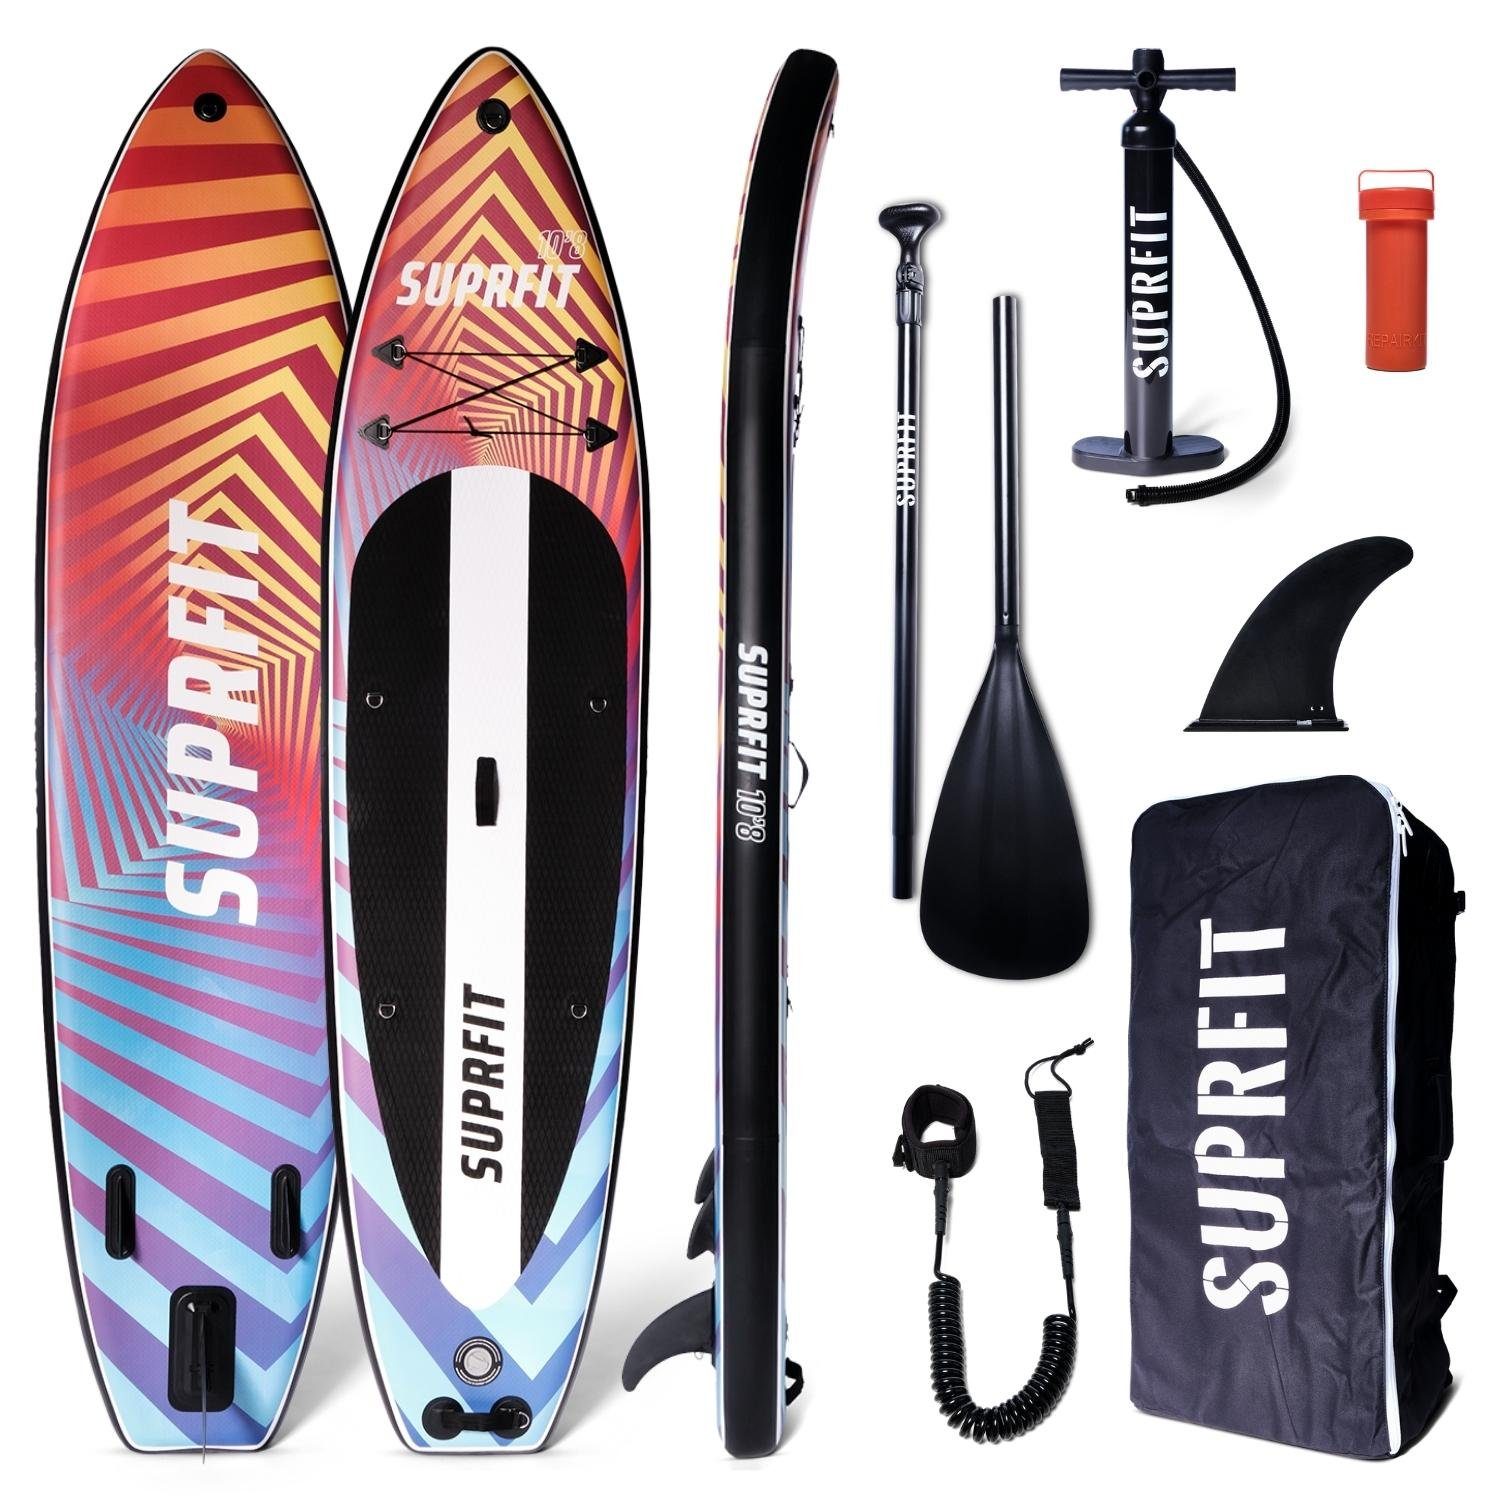 SF SUPRFIT SUP-Board Stand-Up-Paddling Board Optical, als aufblasbares Komplett-Set, Stand Up Paddle Board mit doppelter PVC Schichtung, Optimal ab 60 kg, max 140 kg - 330 x 78 x 15 cm